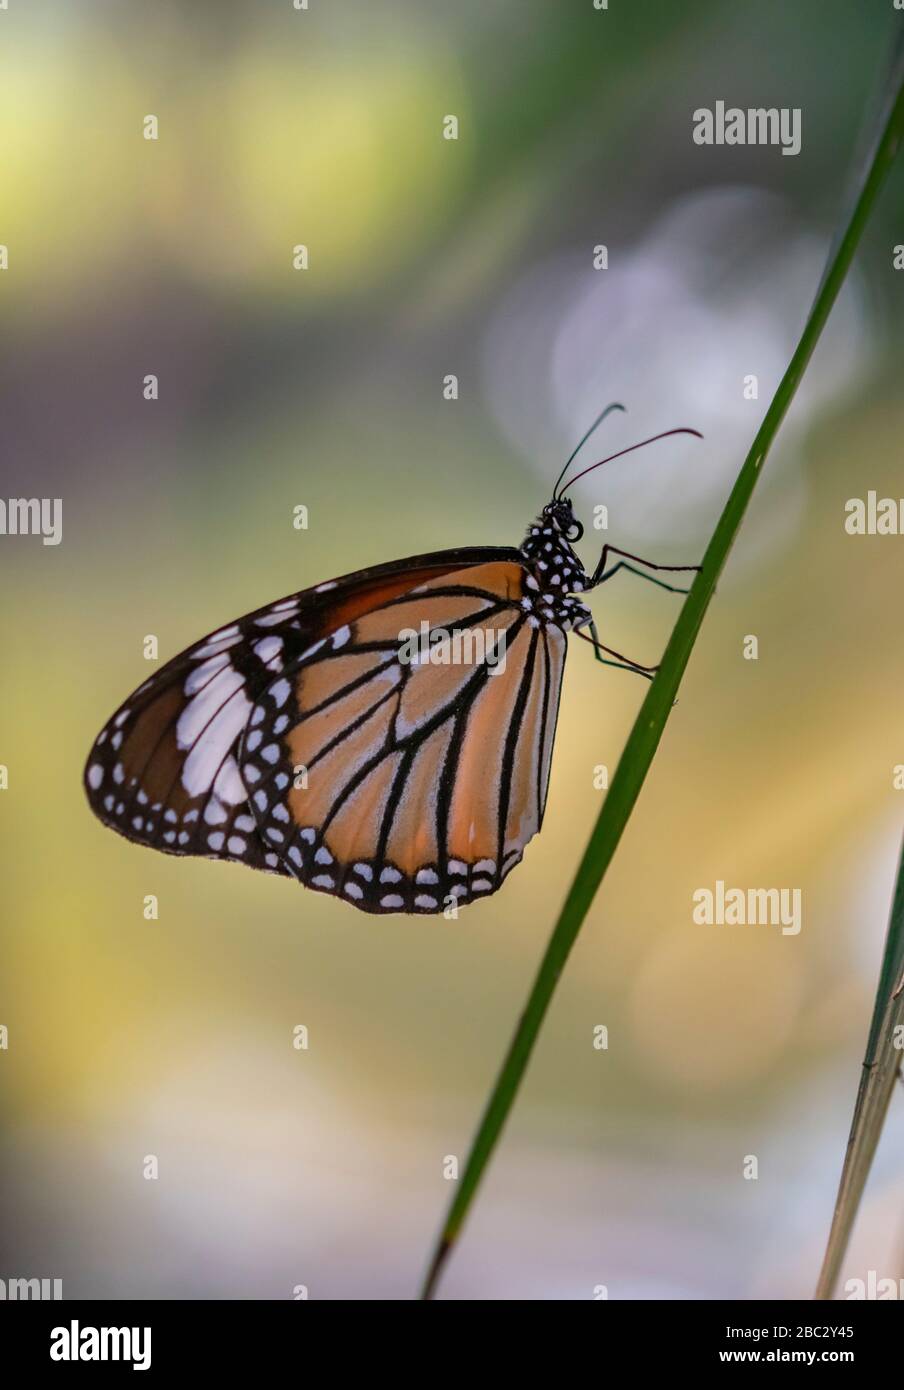 striped tiger Butterfly on grass stem, underside of wing Stock Photo